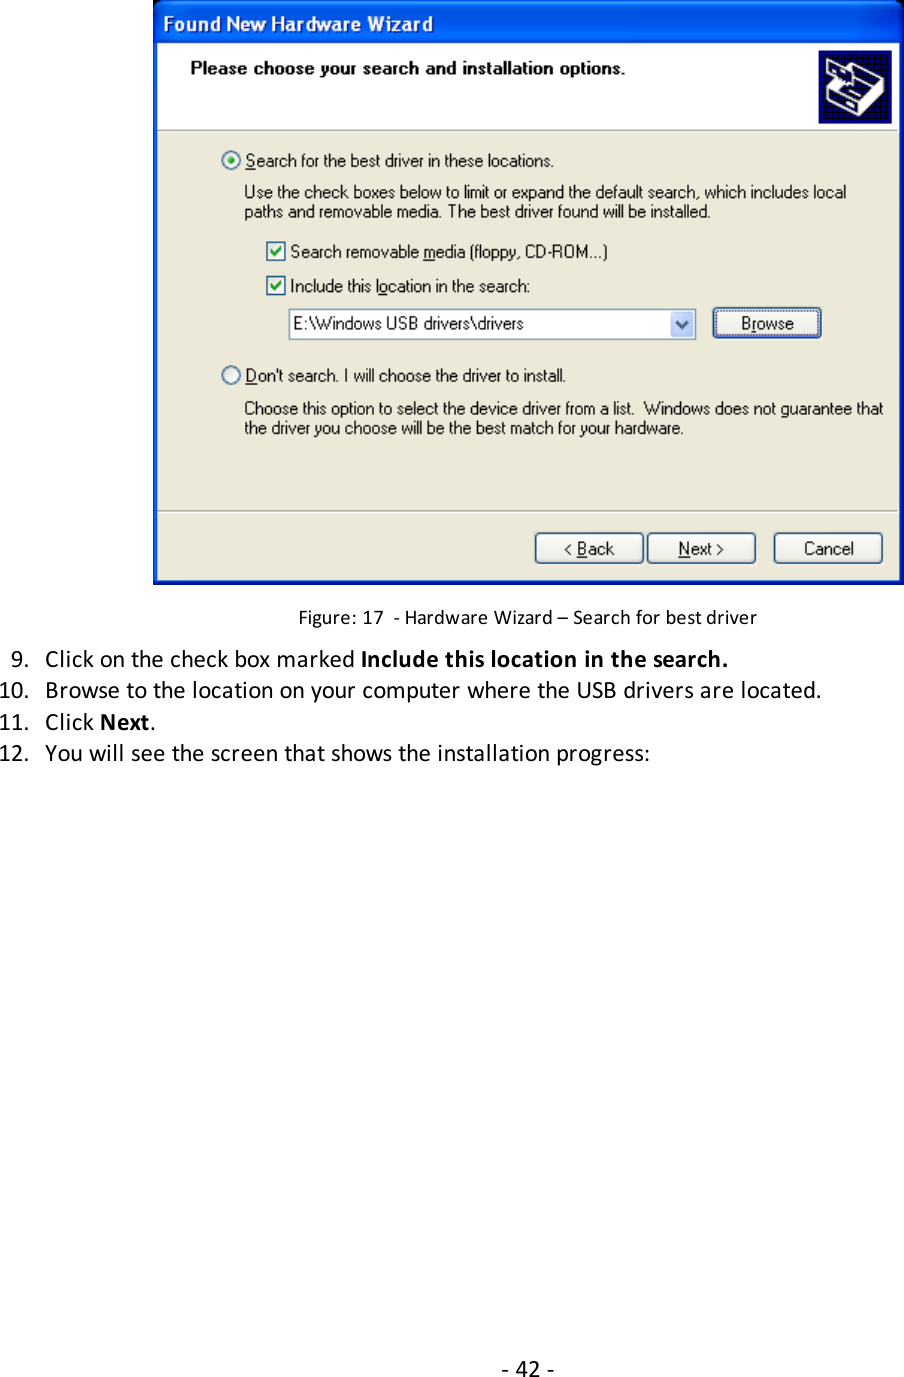 Figure: 17 - Hardware Wizard – Search for best driver9. Click on the check box marked Include this location in the search.10. Browse to the location on your computer where the USB drivers are located.11. Click Next.12. You will see the screen that shows the installation progress:- 42 -